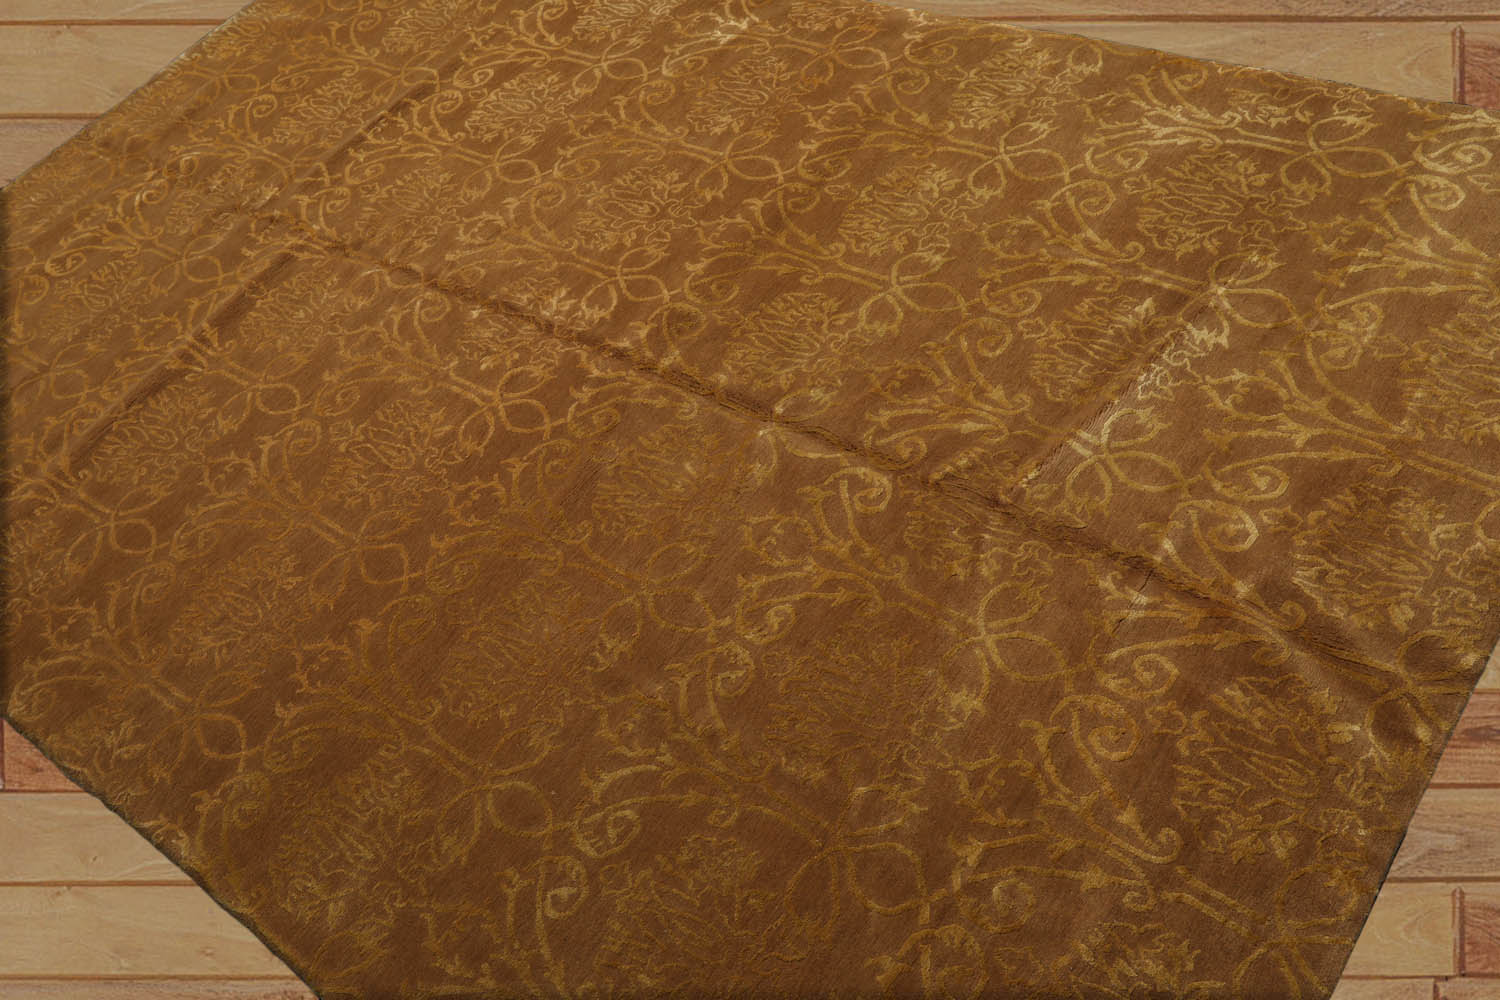 Gaibrial 6x9 Hand Knotted Tibetan Wool and Silk Transitional Oriental Area Rug Tone on Tone Gold Color